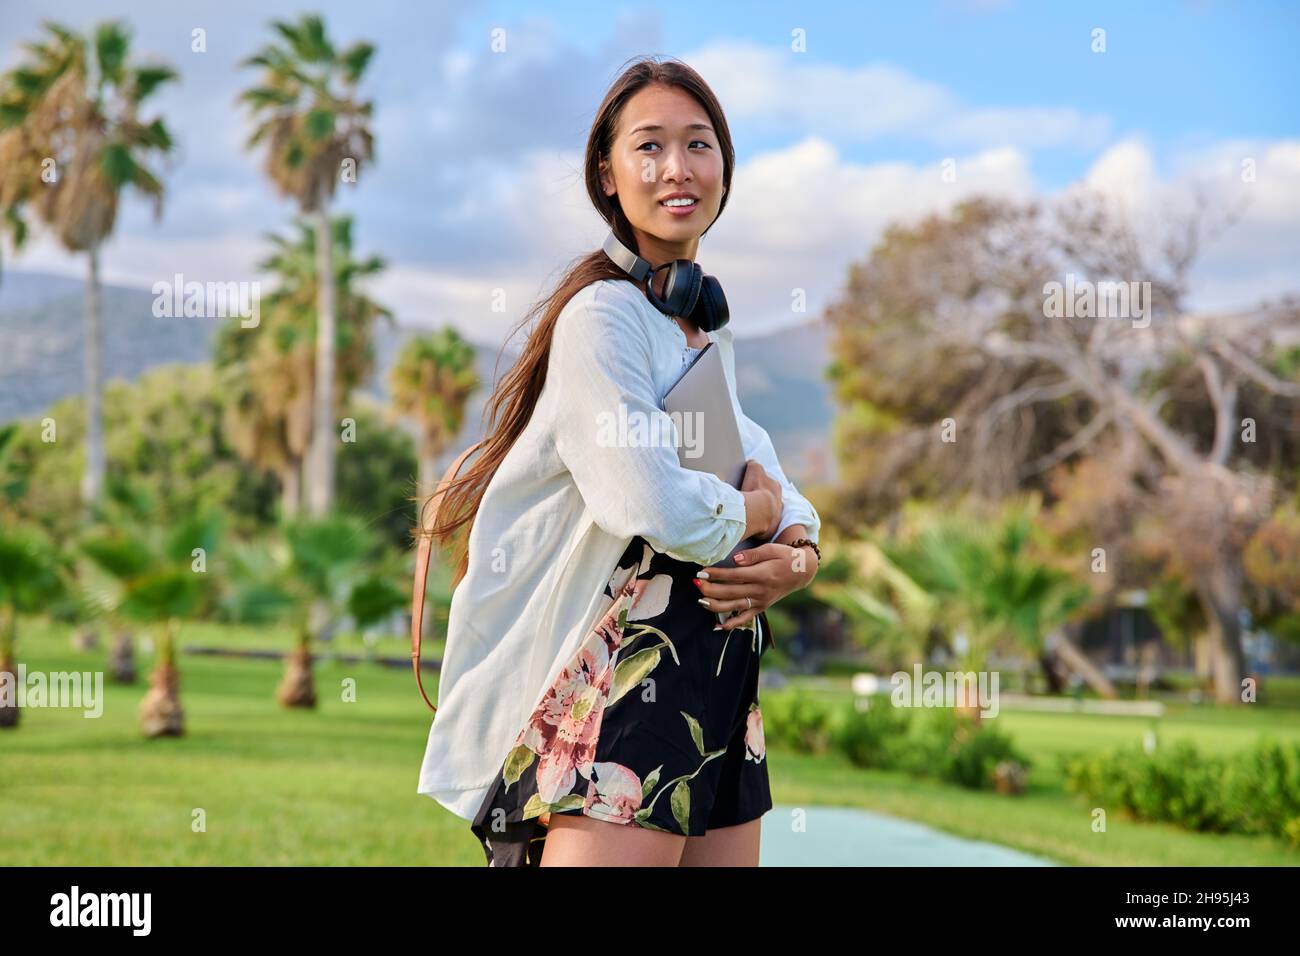 Portrait of young woman with backpack, headphones and laptop in her hands Stock Photo